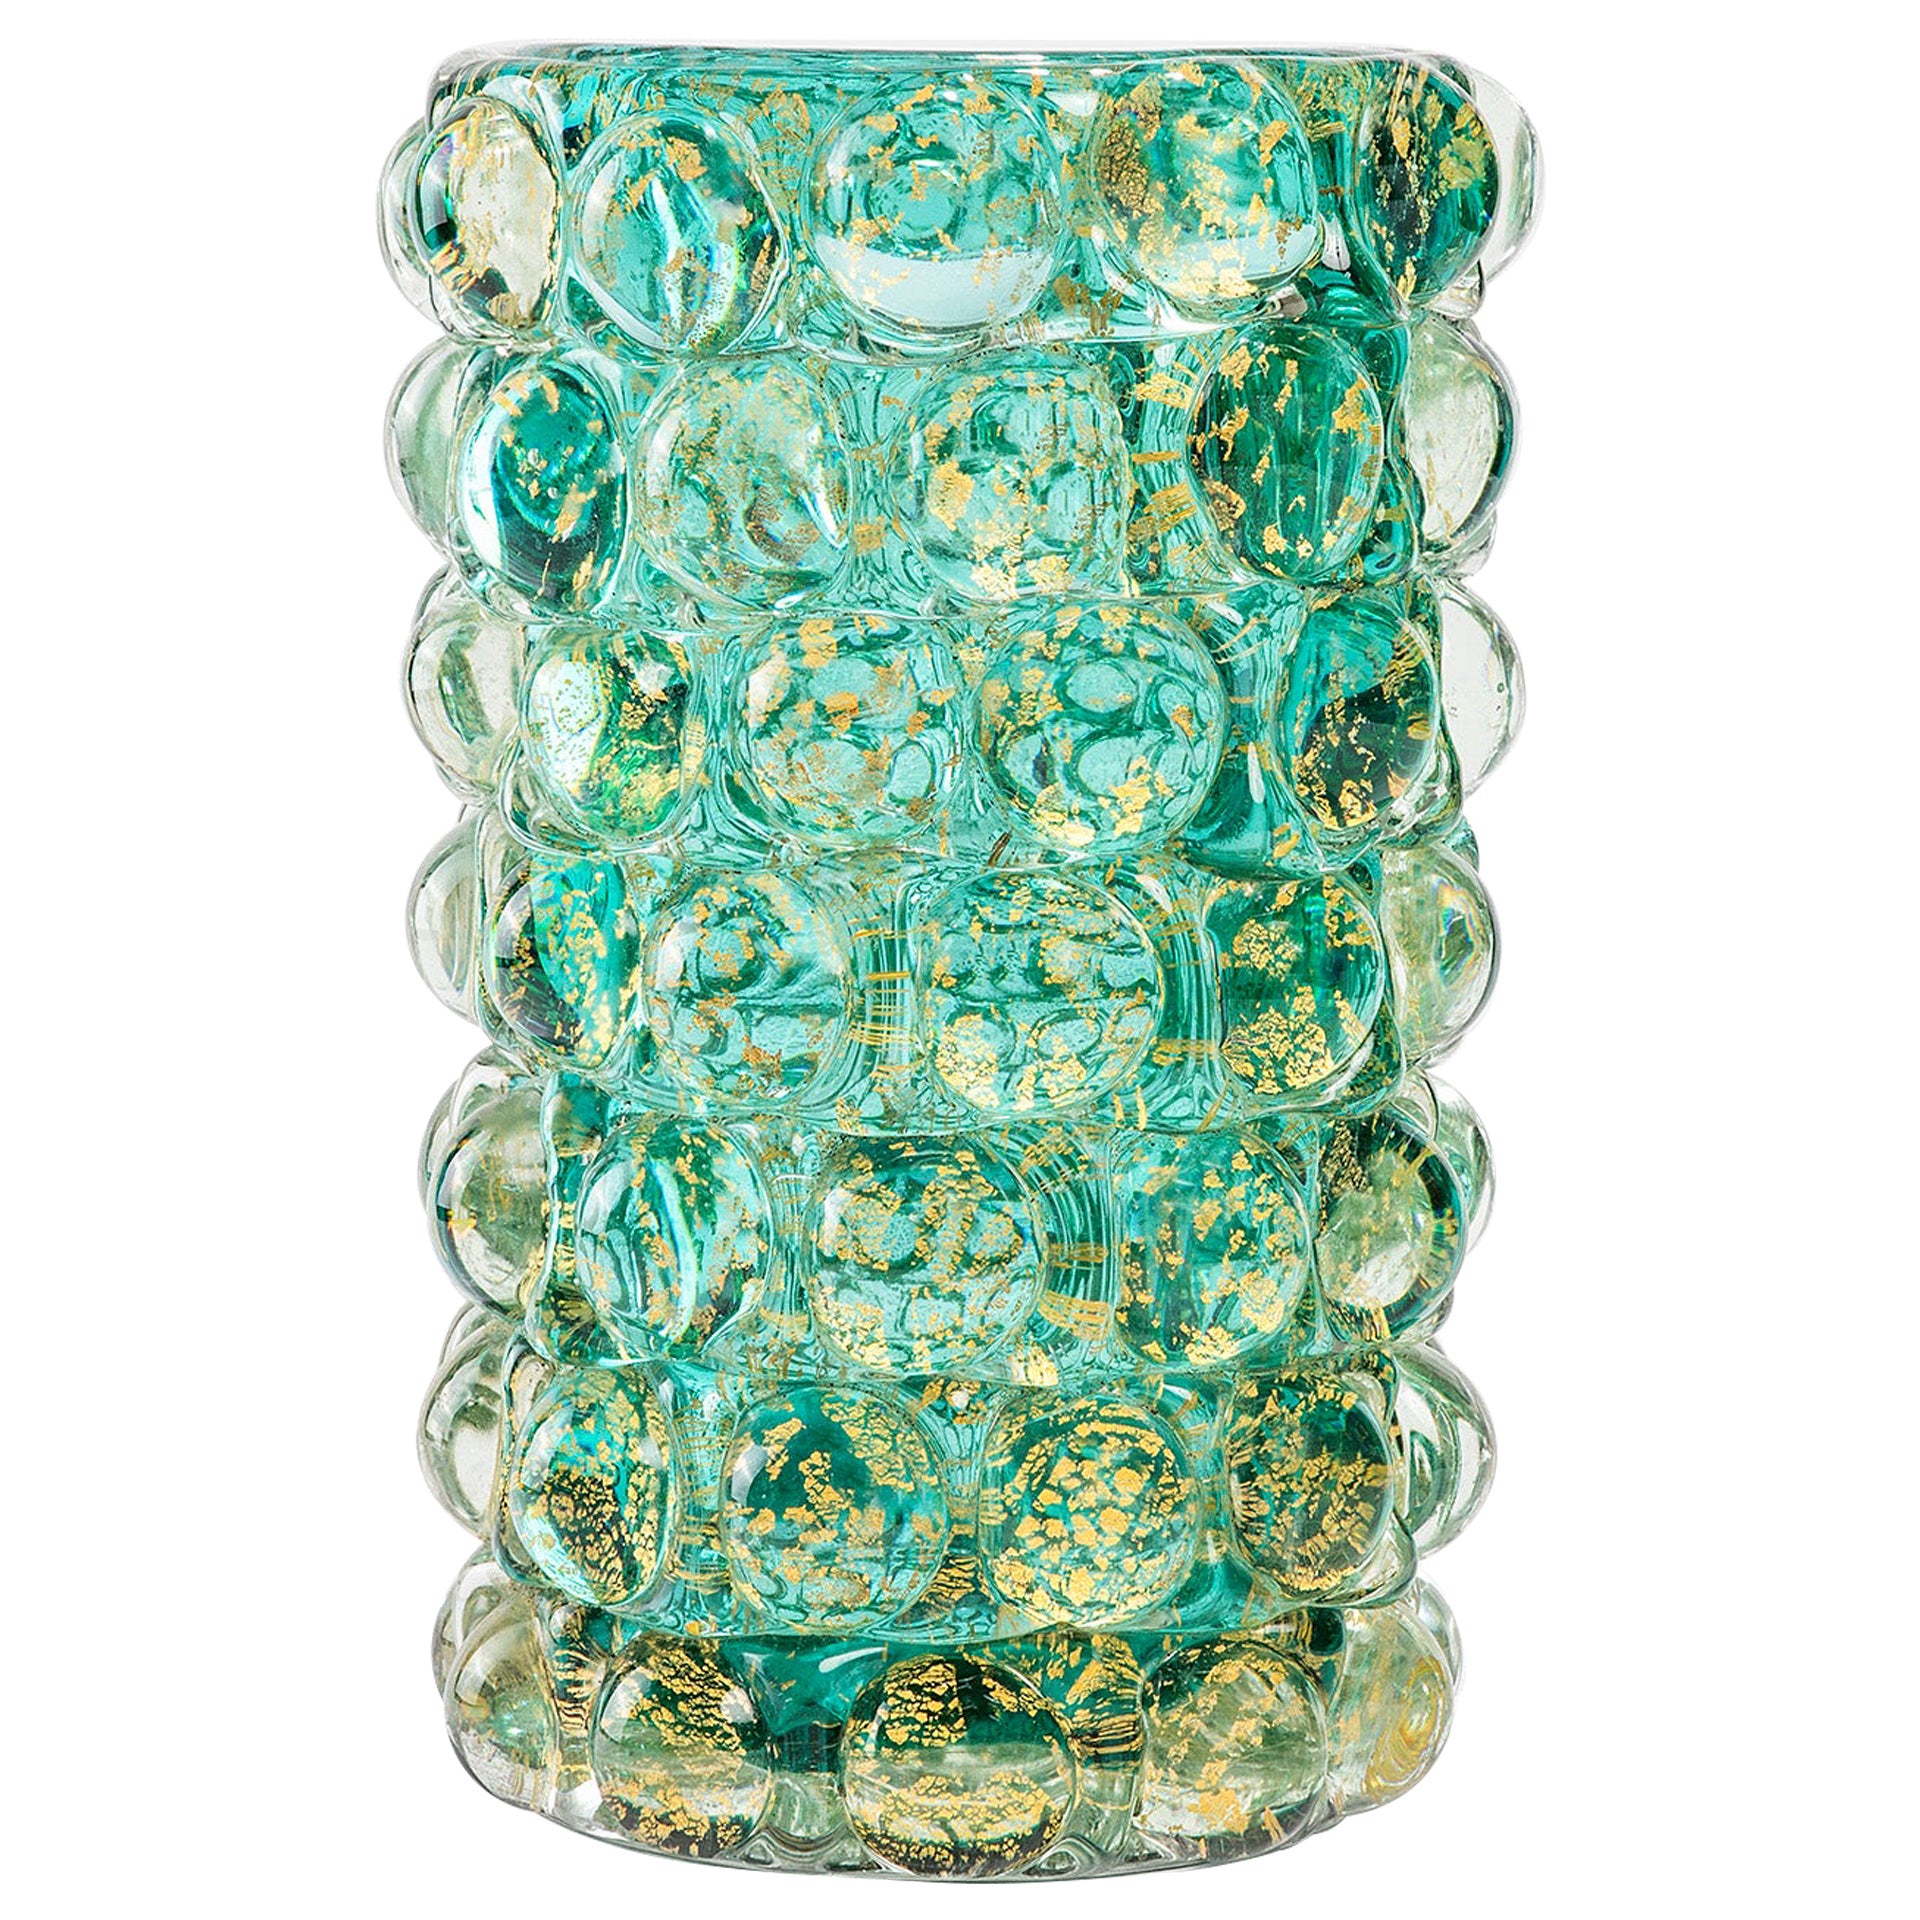 20th Century Barovier & Toso Cylindrical Glass Vase from Lenti Series, 40s